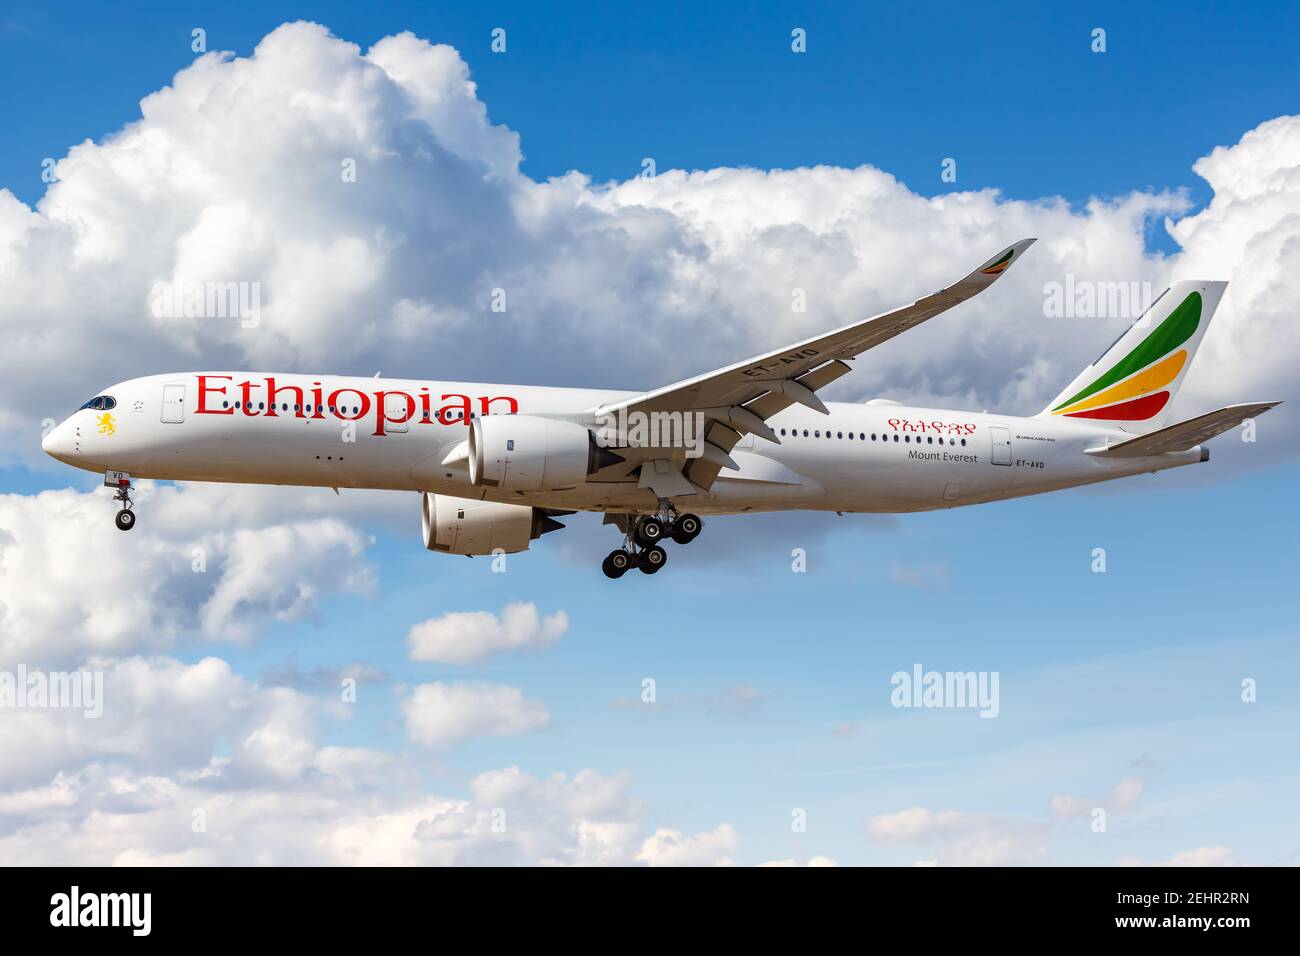 London, United Kingdom - July 31, 2018: Ethiopian Airbus A350-900 airplane at London Heathrow Airport (LHR) in the United Kingdom. Stock Photo